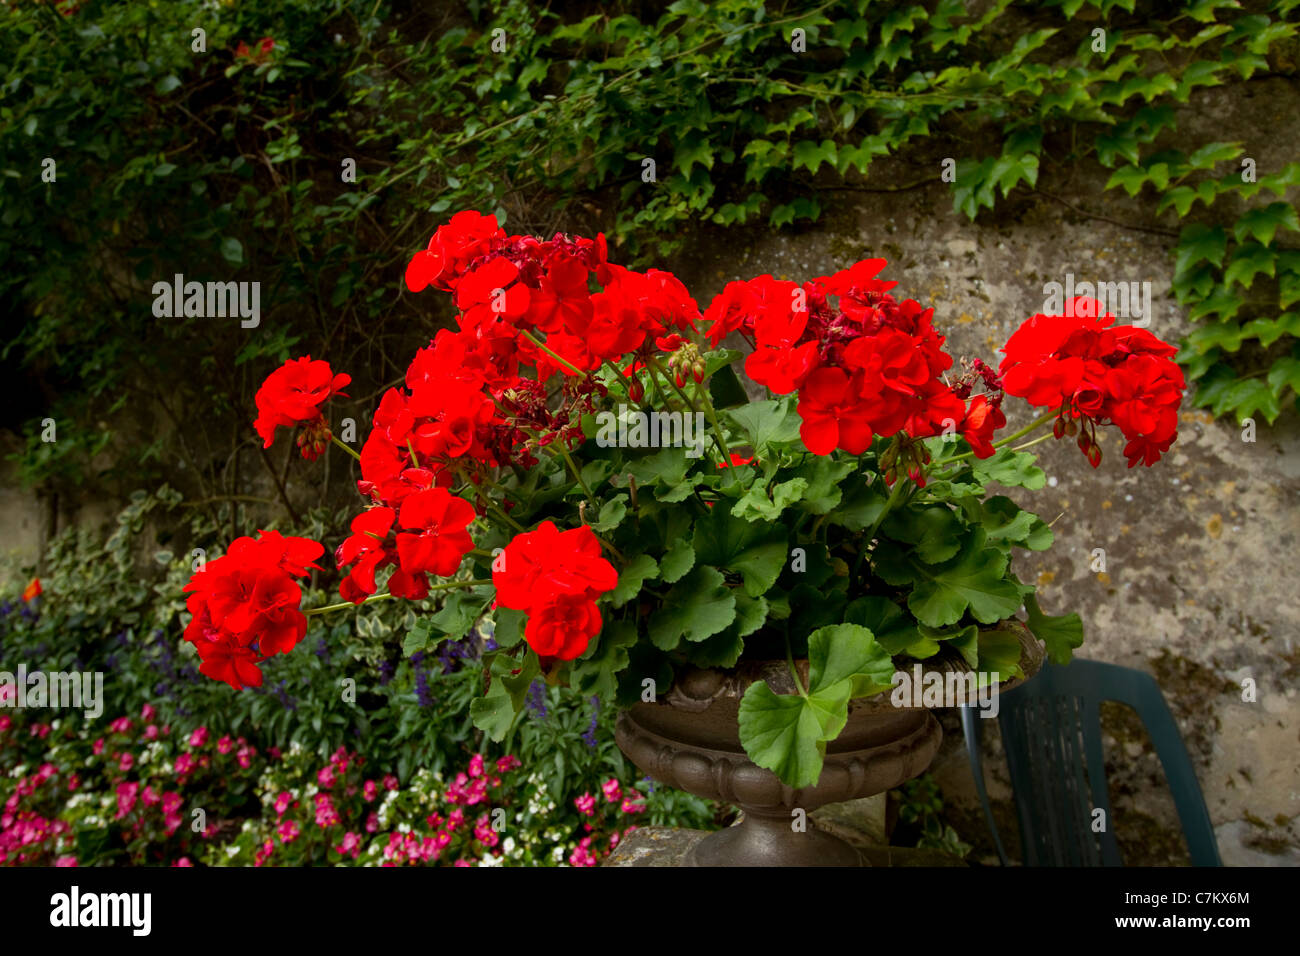 Red or scarlet begonias in a garden pot in the gardens of Chateau de Montresor Cher Valley France Stock Photo